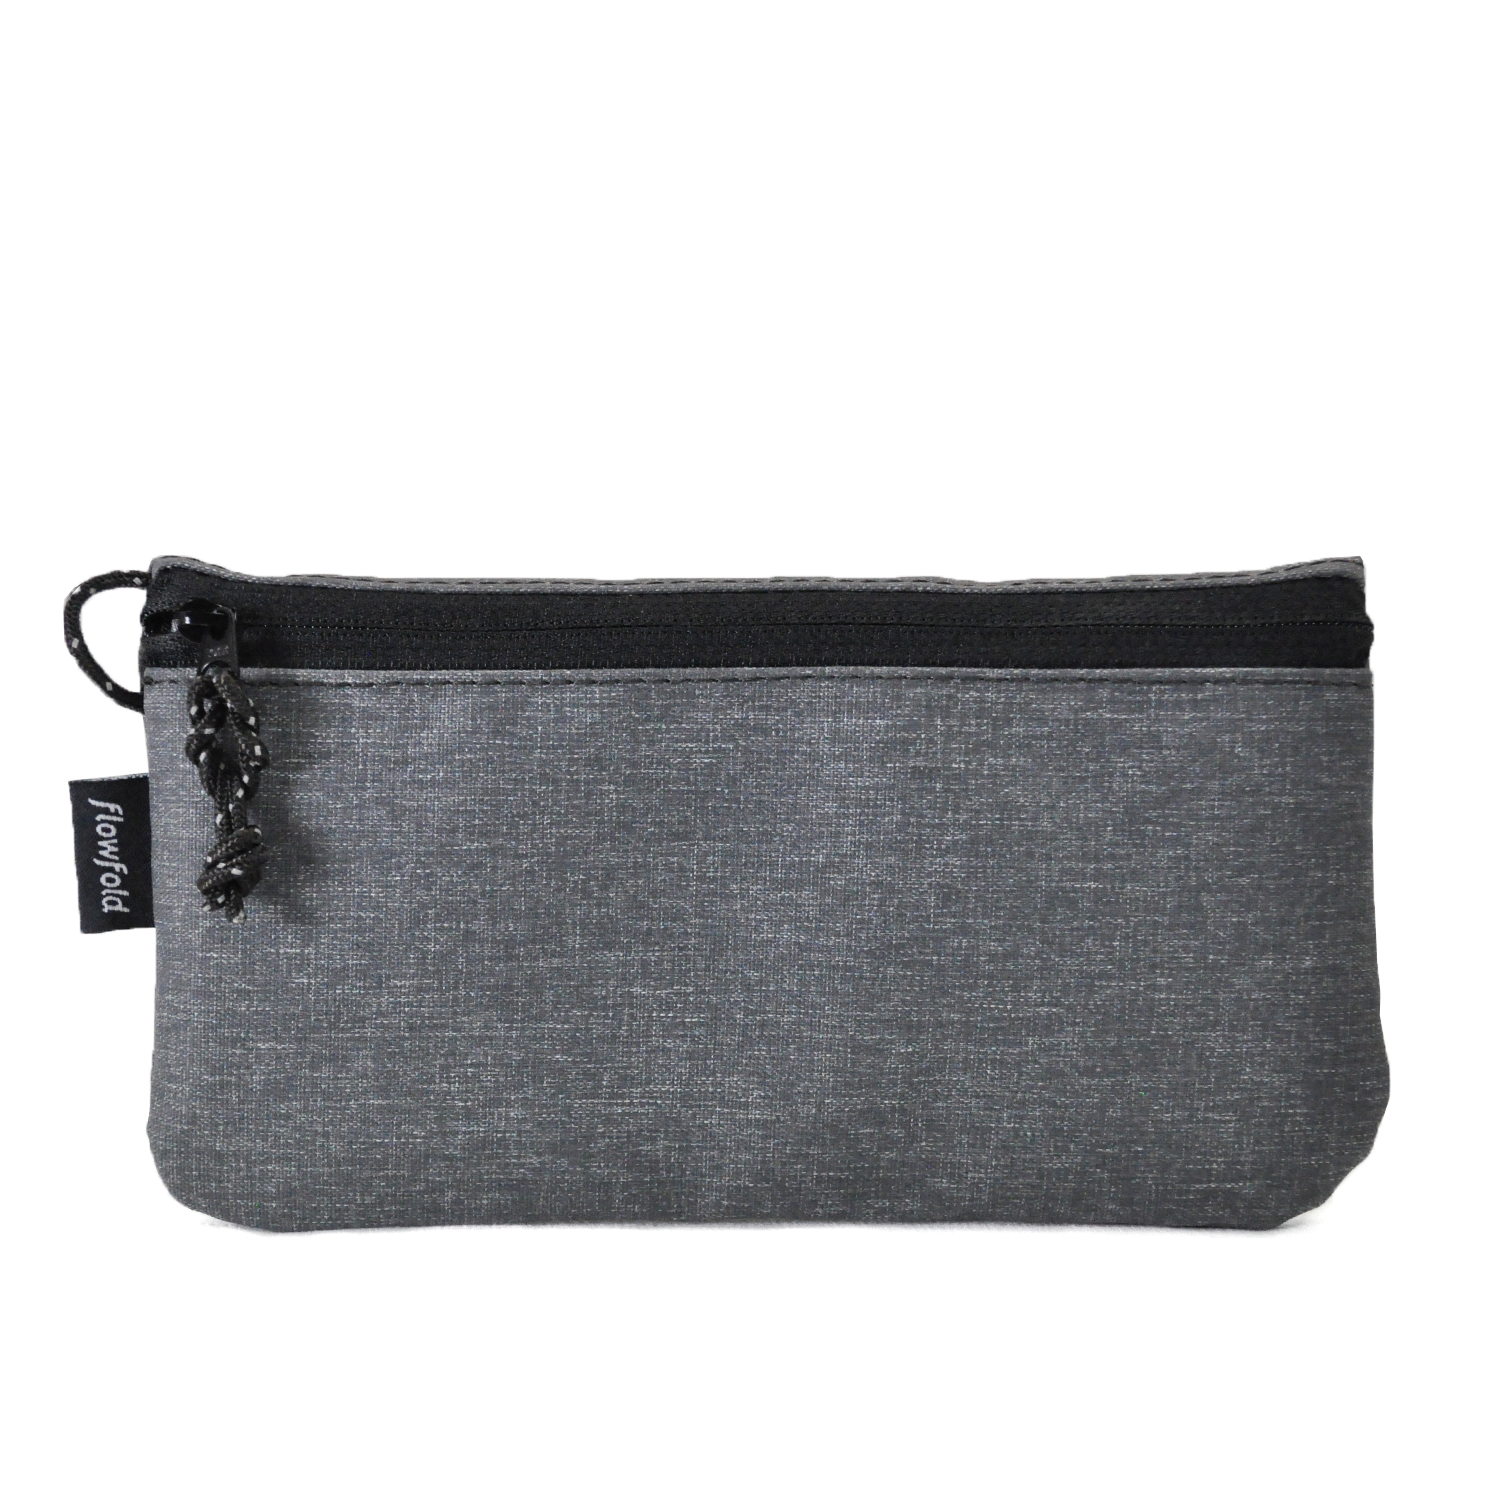 Flowfold Creator Large Zippered Women's Wallet For Cash, Cards, and Phone Recycled Heather Grey